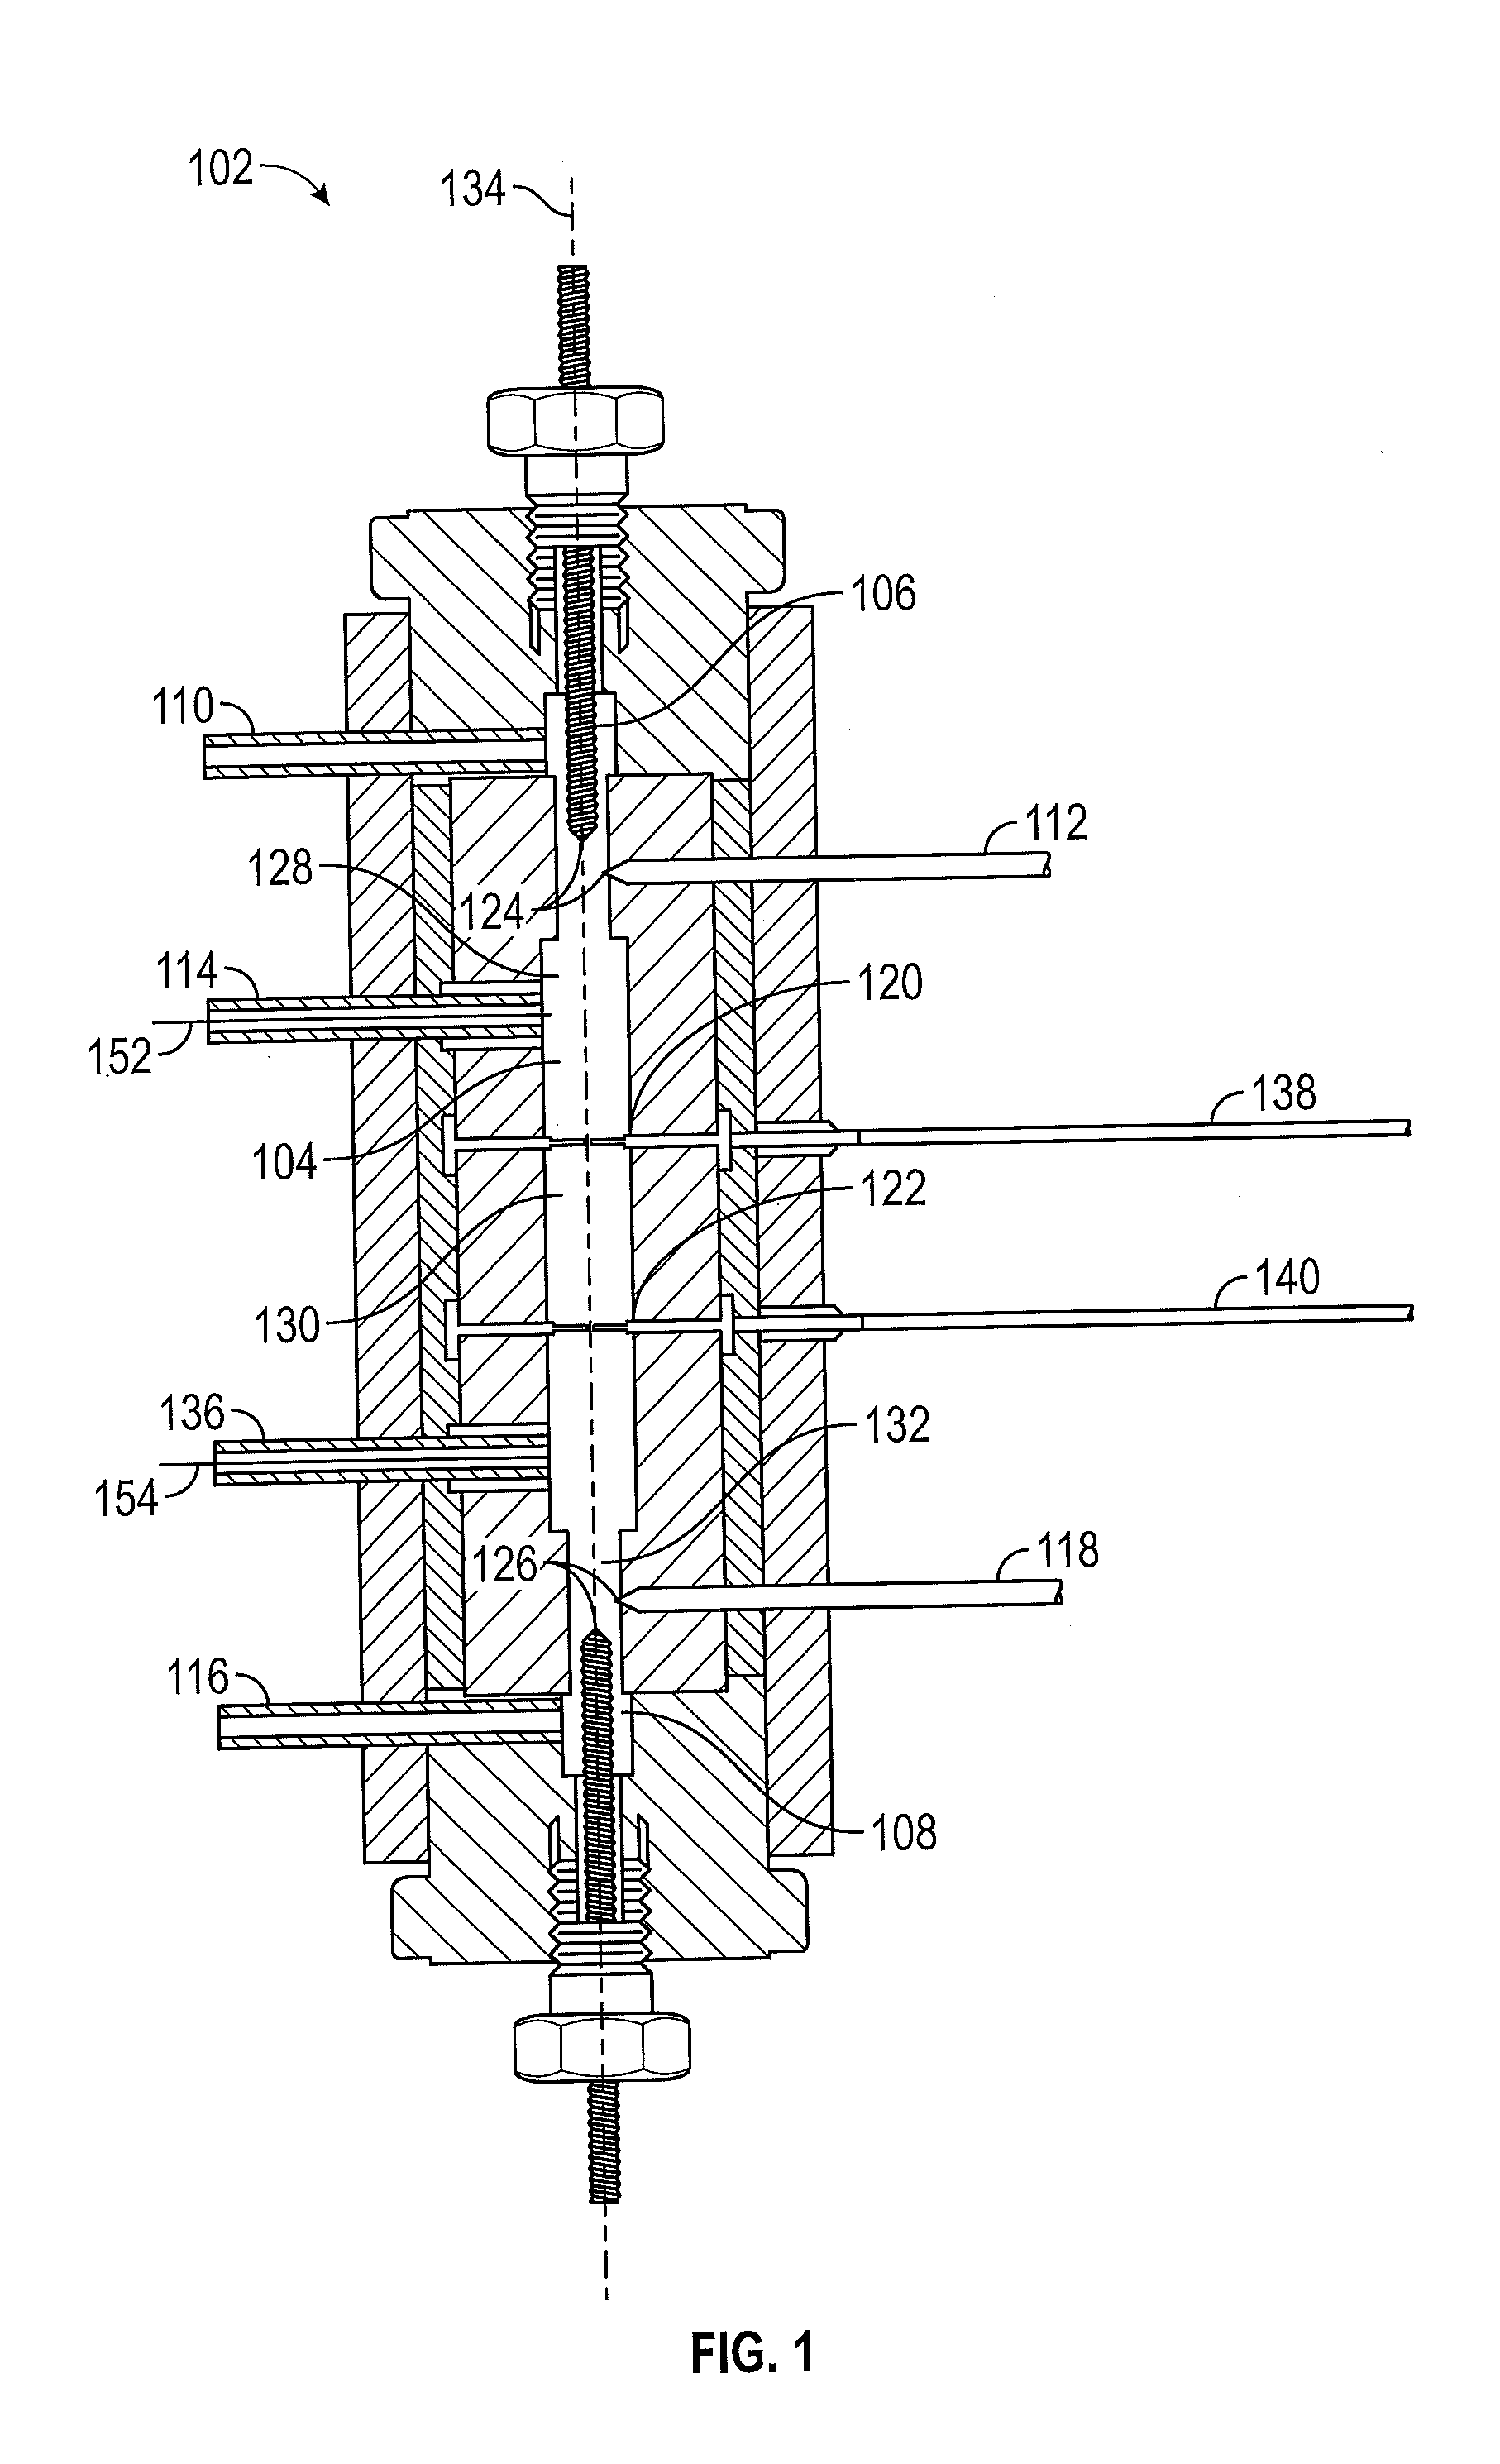 Photo ionization detector for gas chromatography having at least two separately ionizing sources